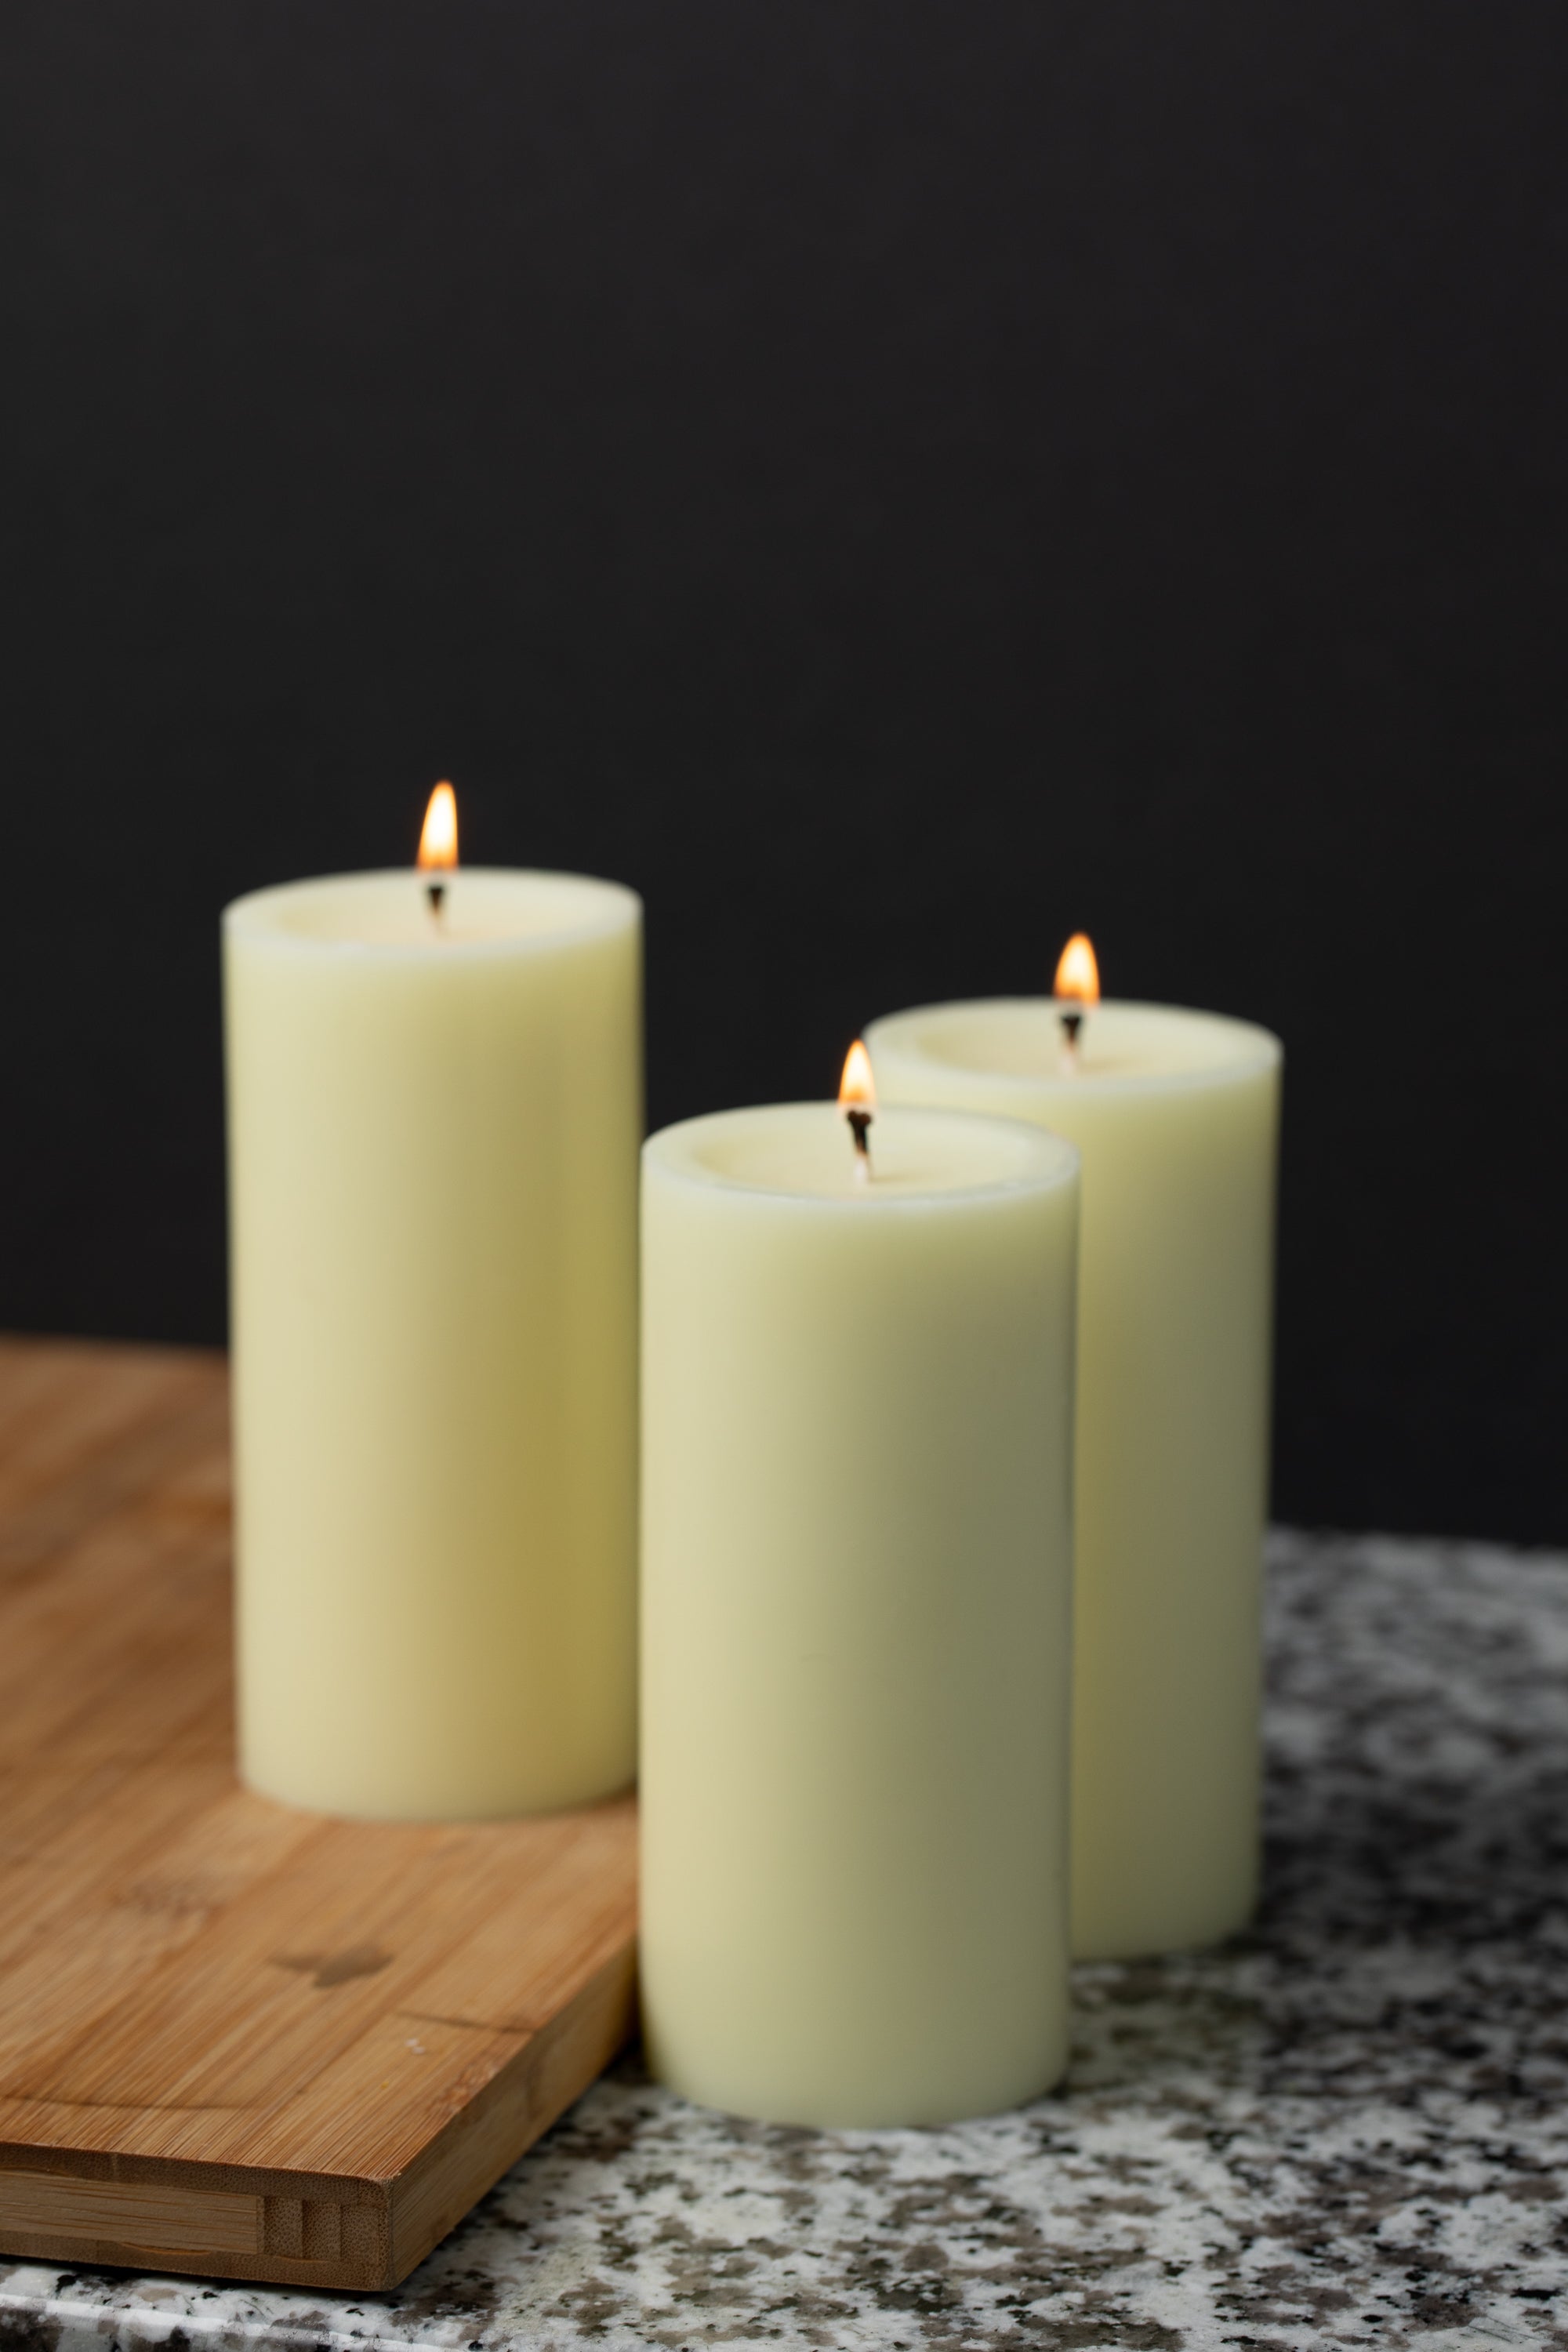 Richland Glass Chimney Candle Shade 4 x 16 Set of 12 - Quick Candles